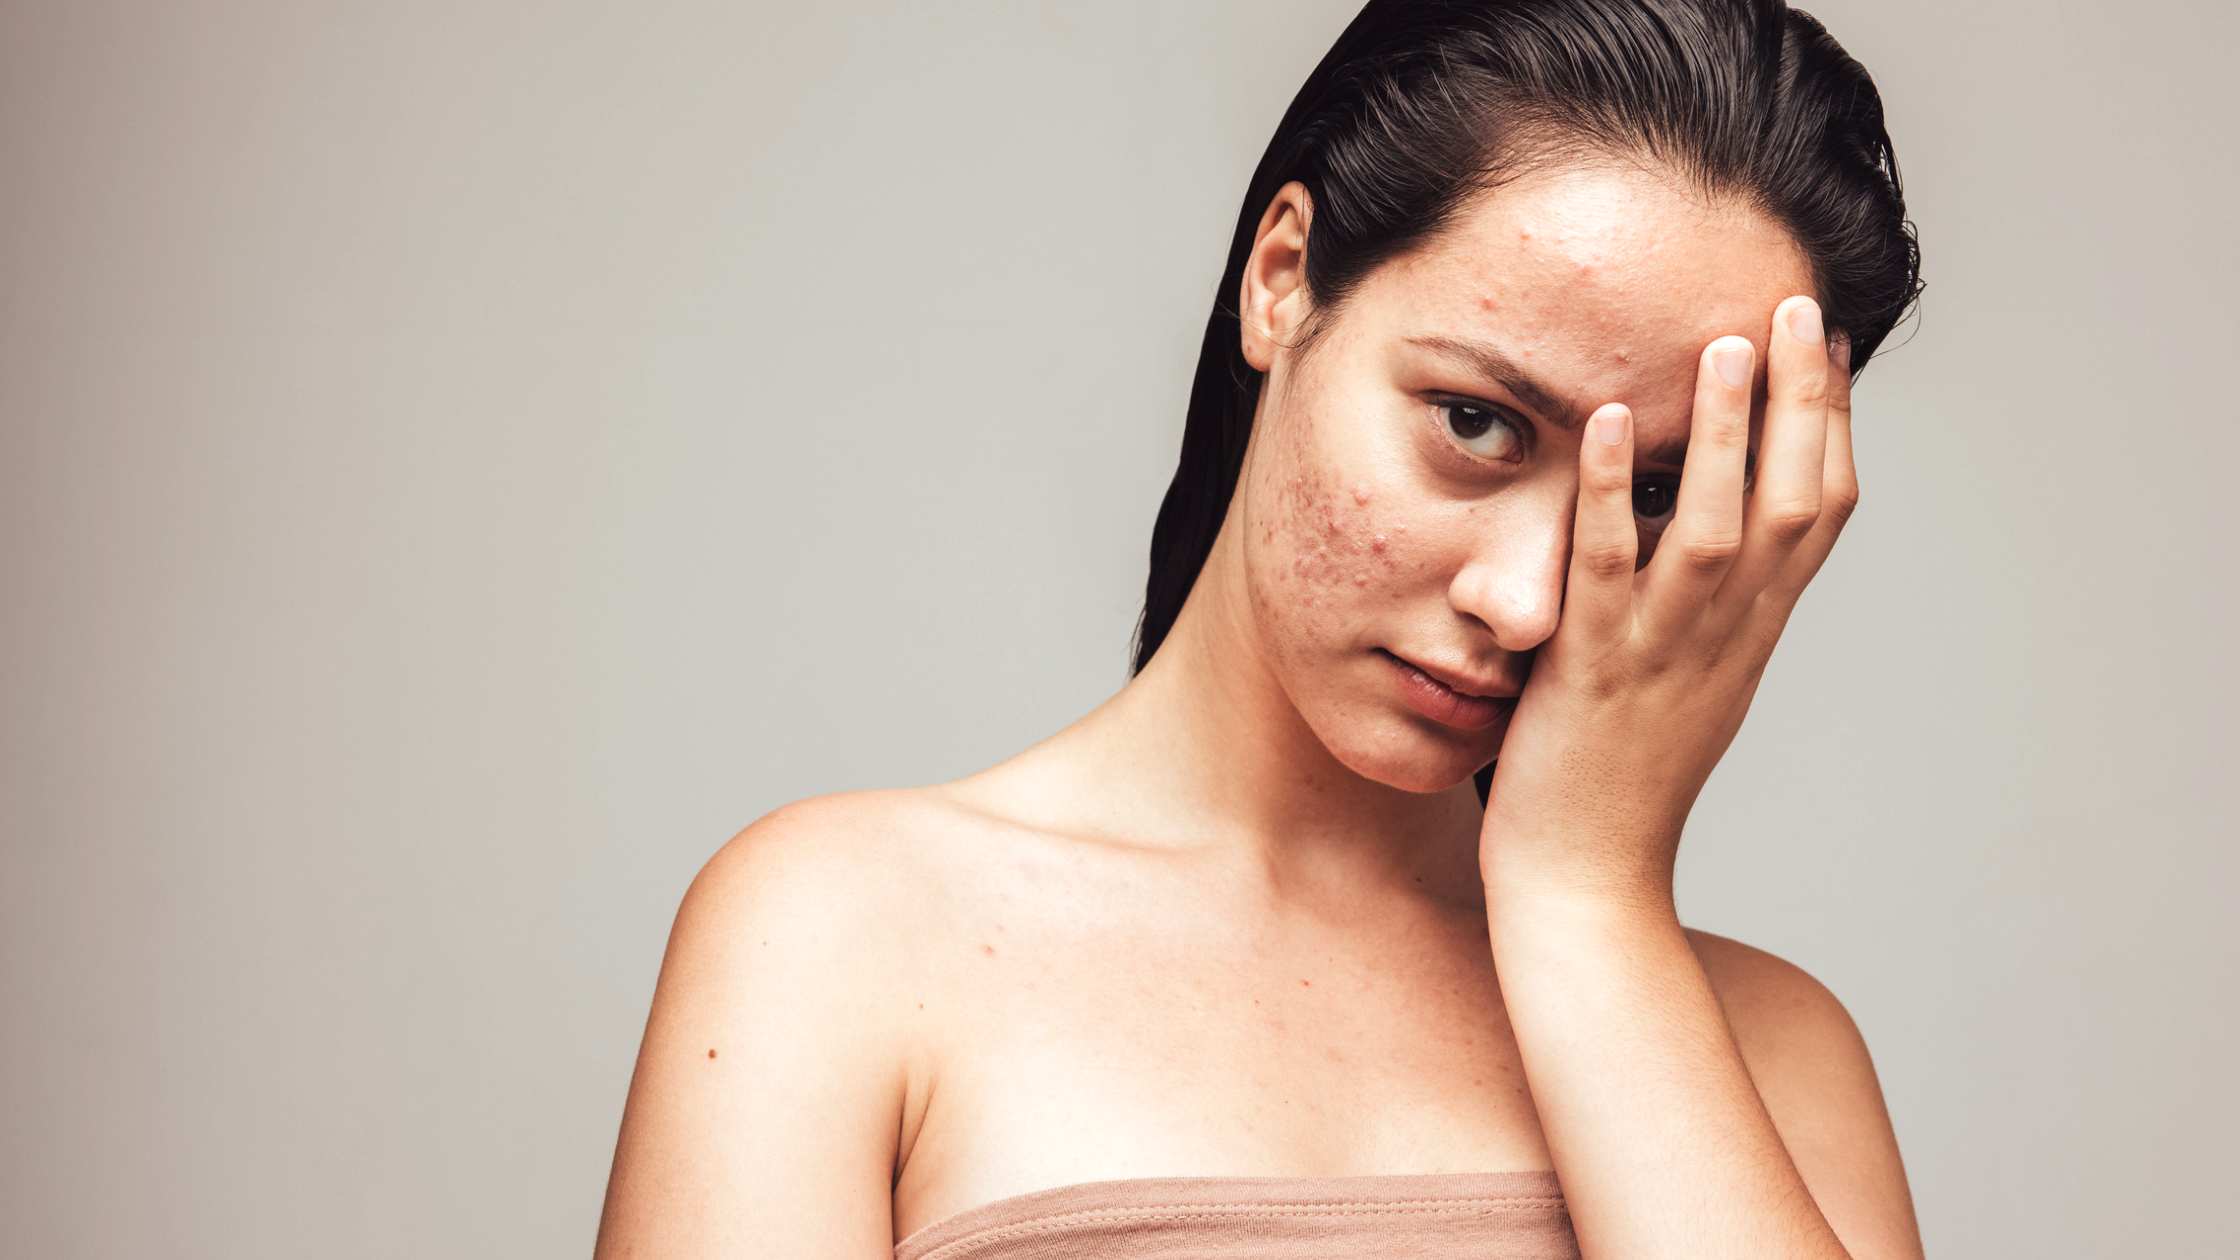  ‎Could Diet Affect Acne? ·